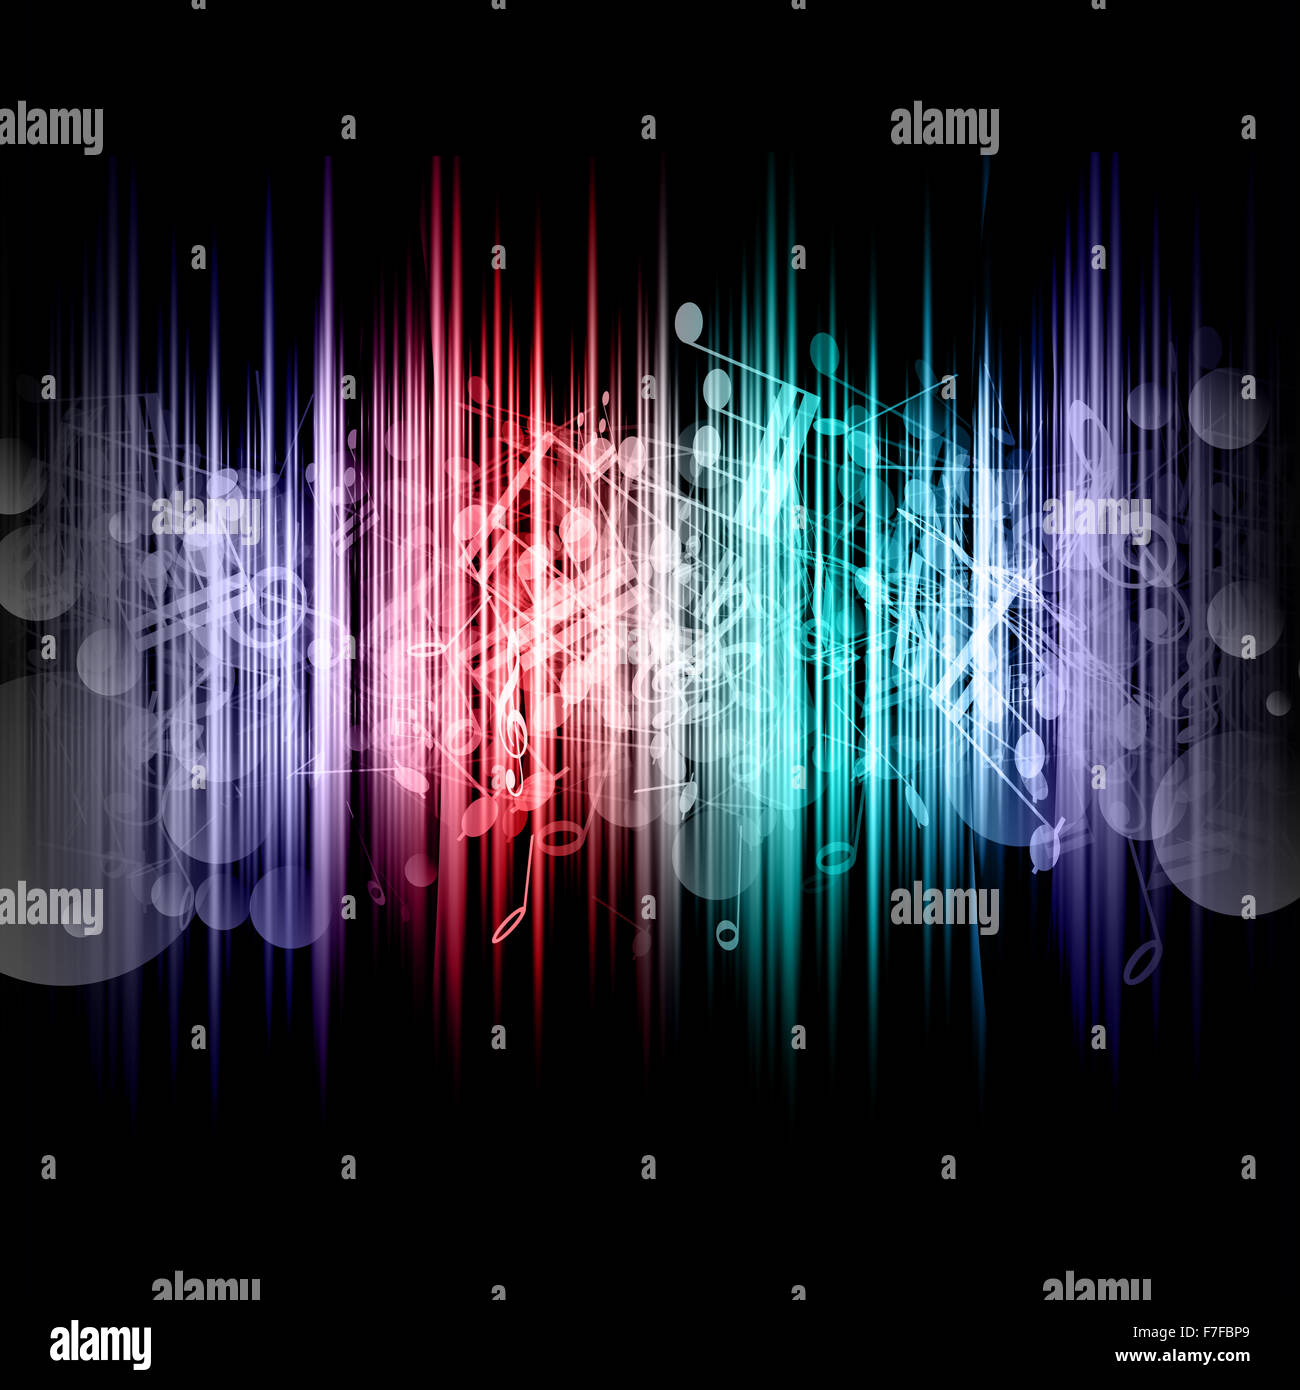 Abstract background with music notes design Stock Photo